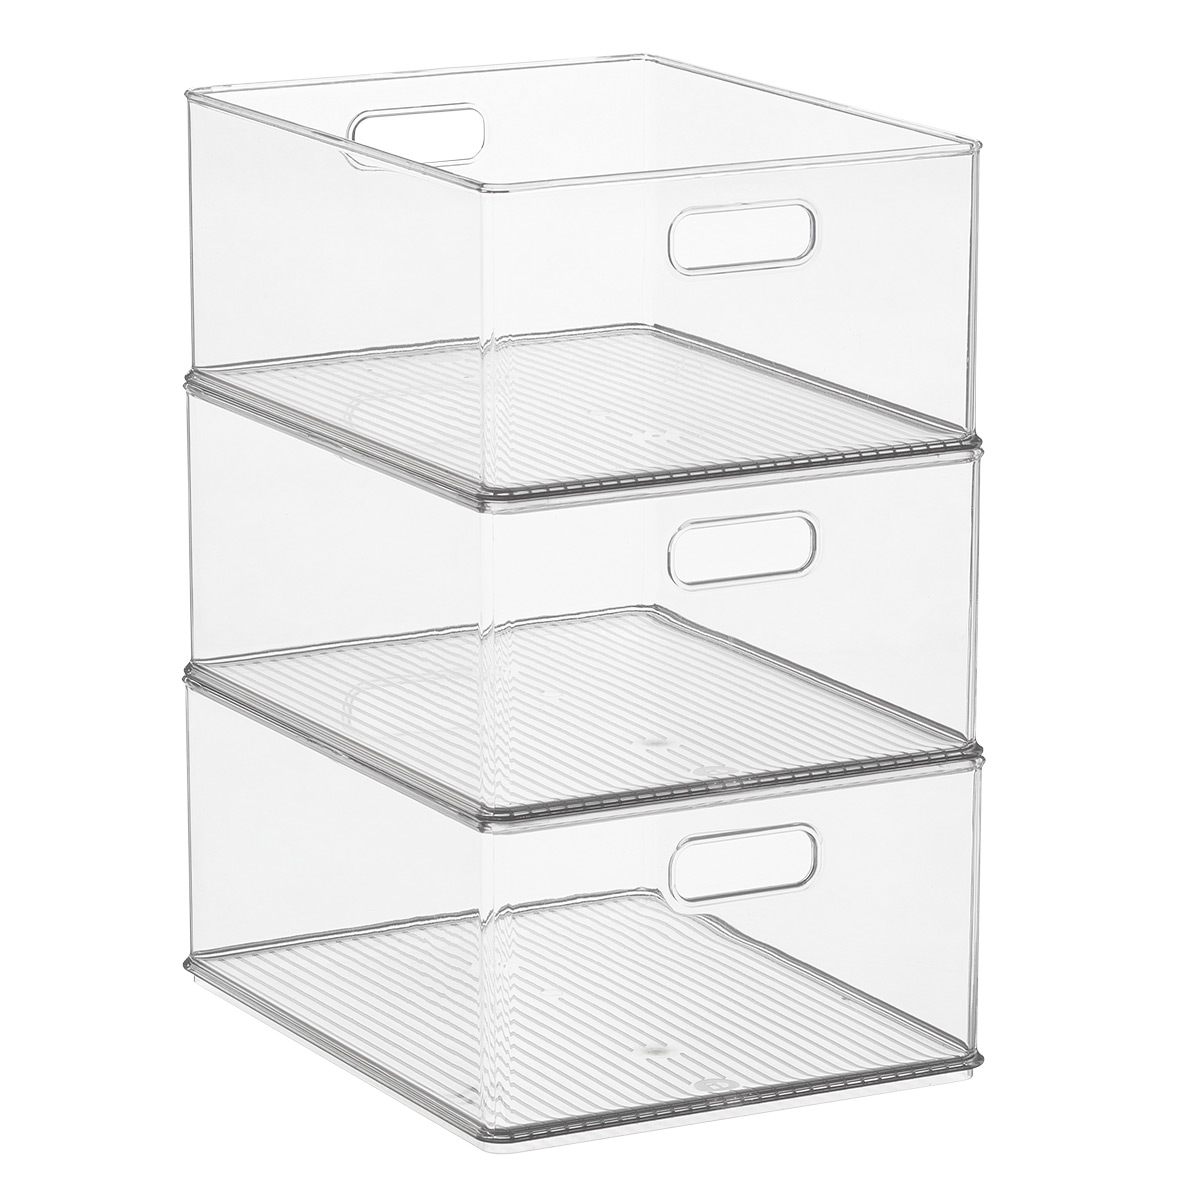 https://images.containerstore.com/catalogimages/477953/10092636-idesign-3-case-small-stacka.jpg